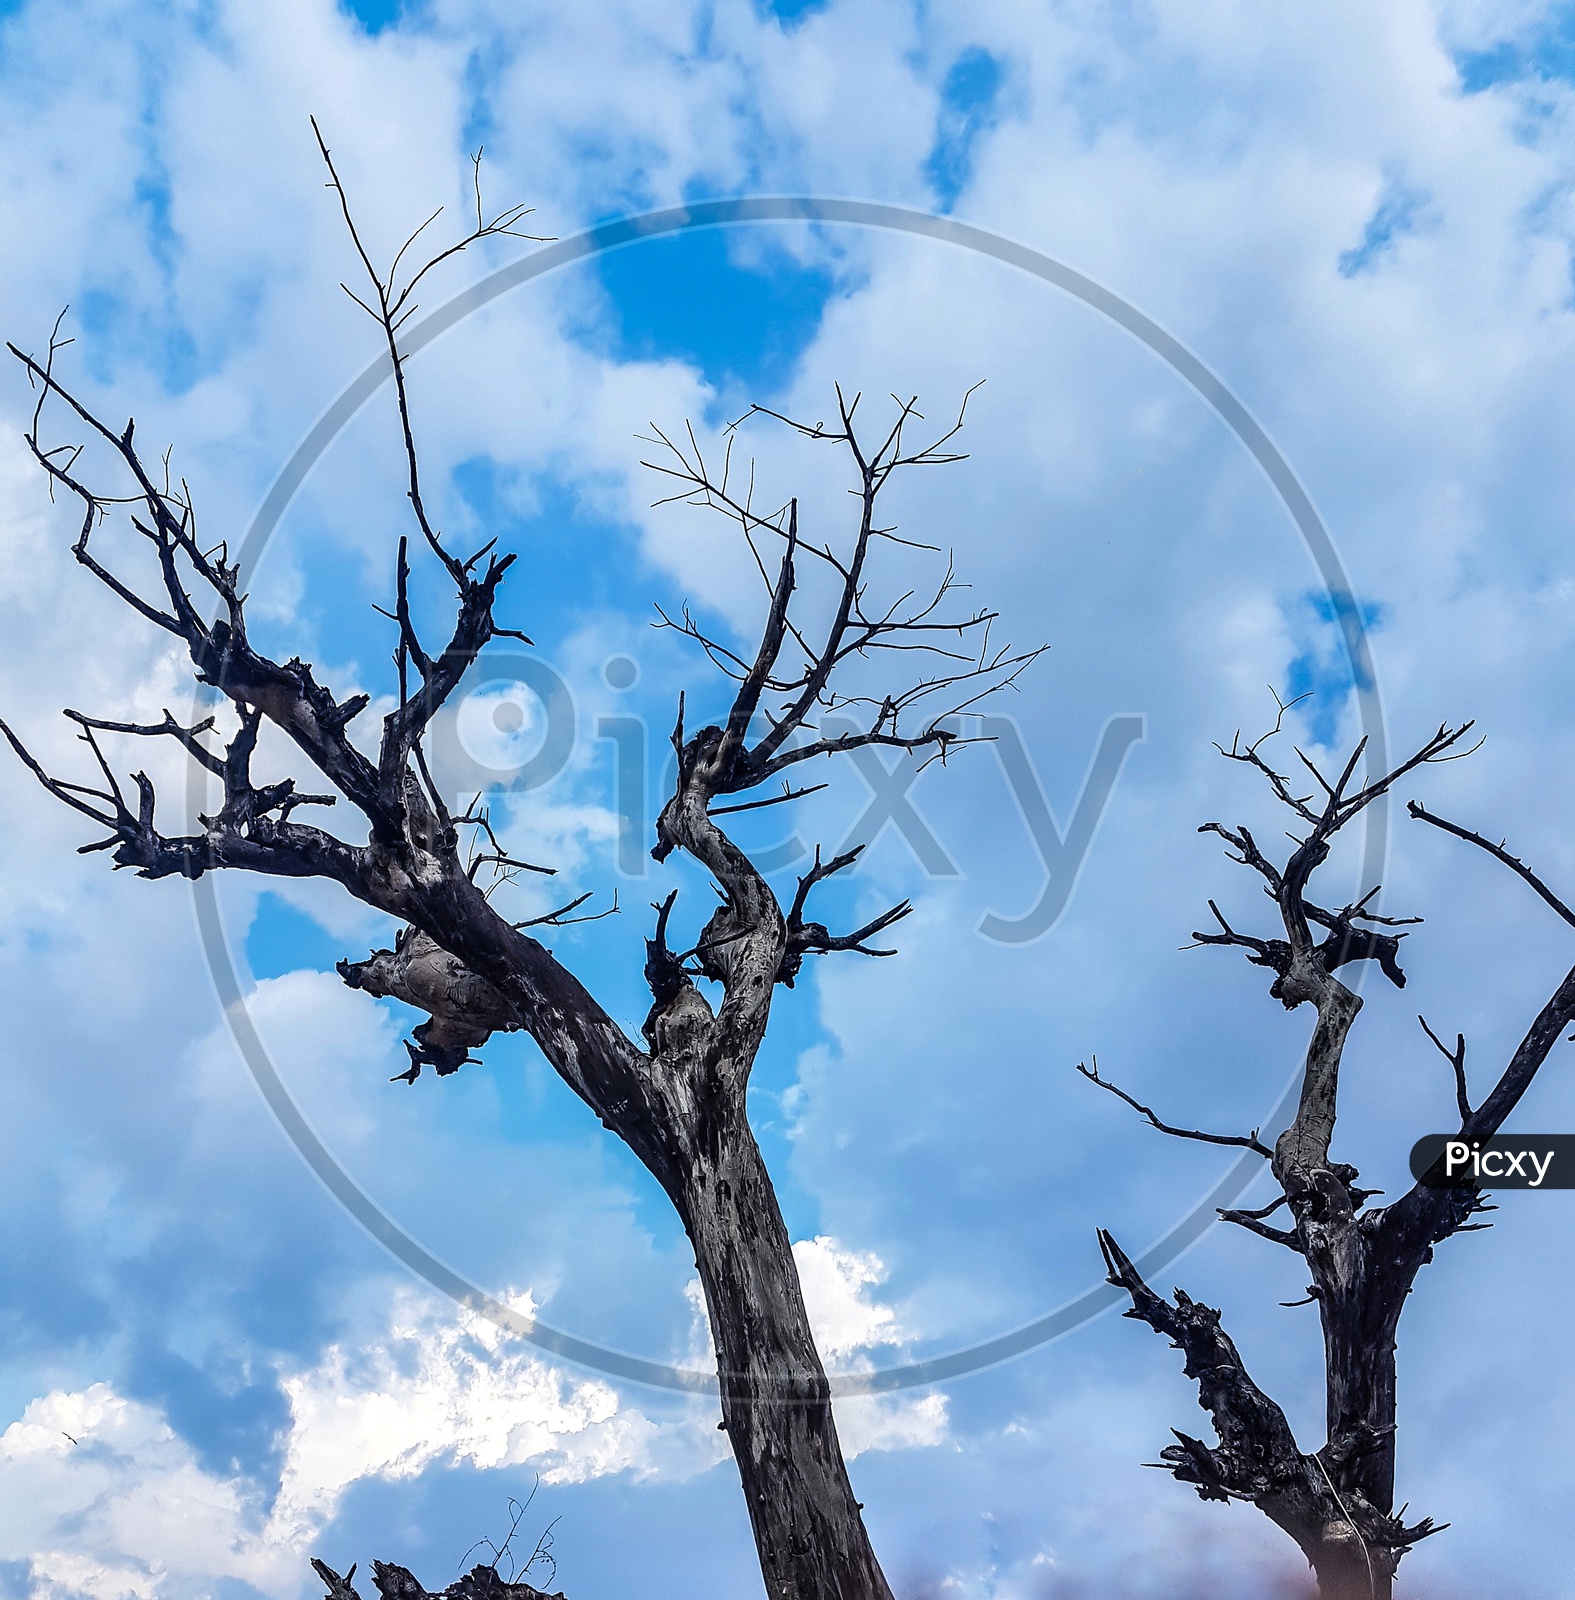 A Leafless or Dead Tree With  Out Leafs Over Blue sky With  Cotton Clouds Background